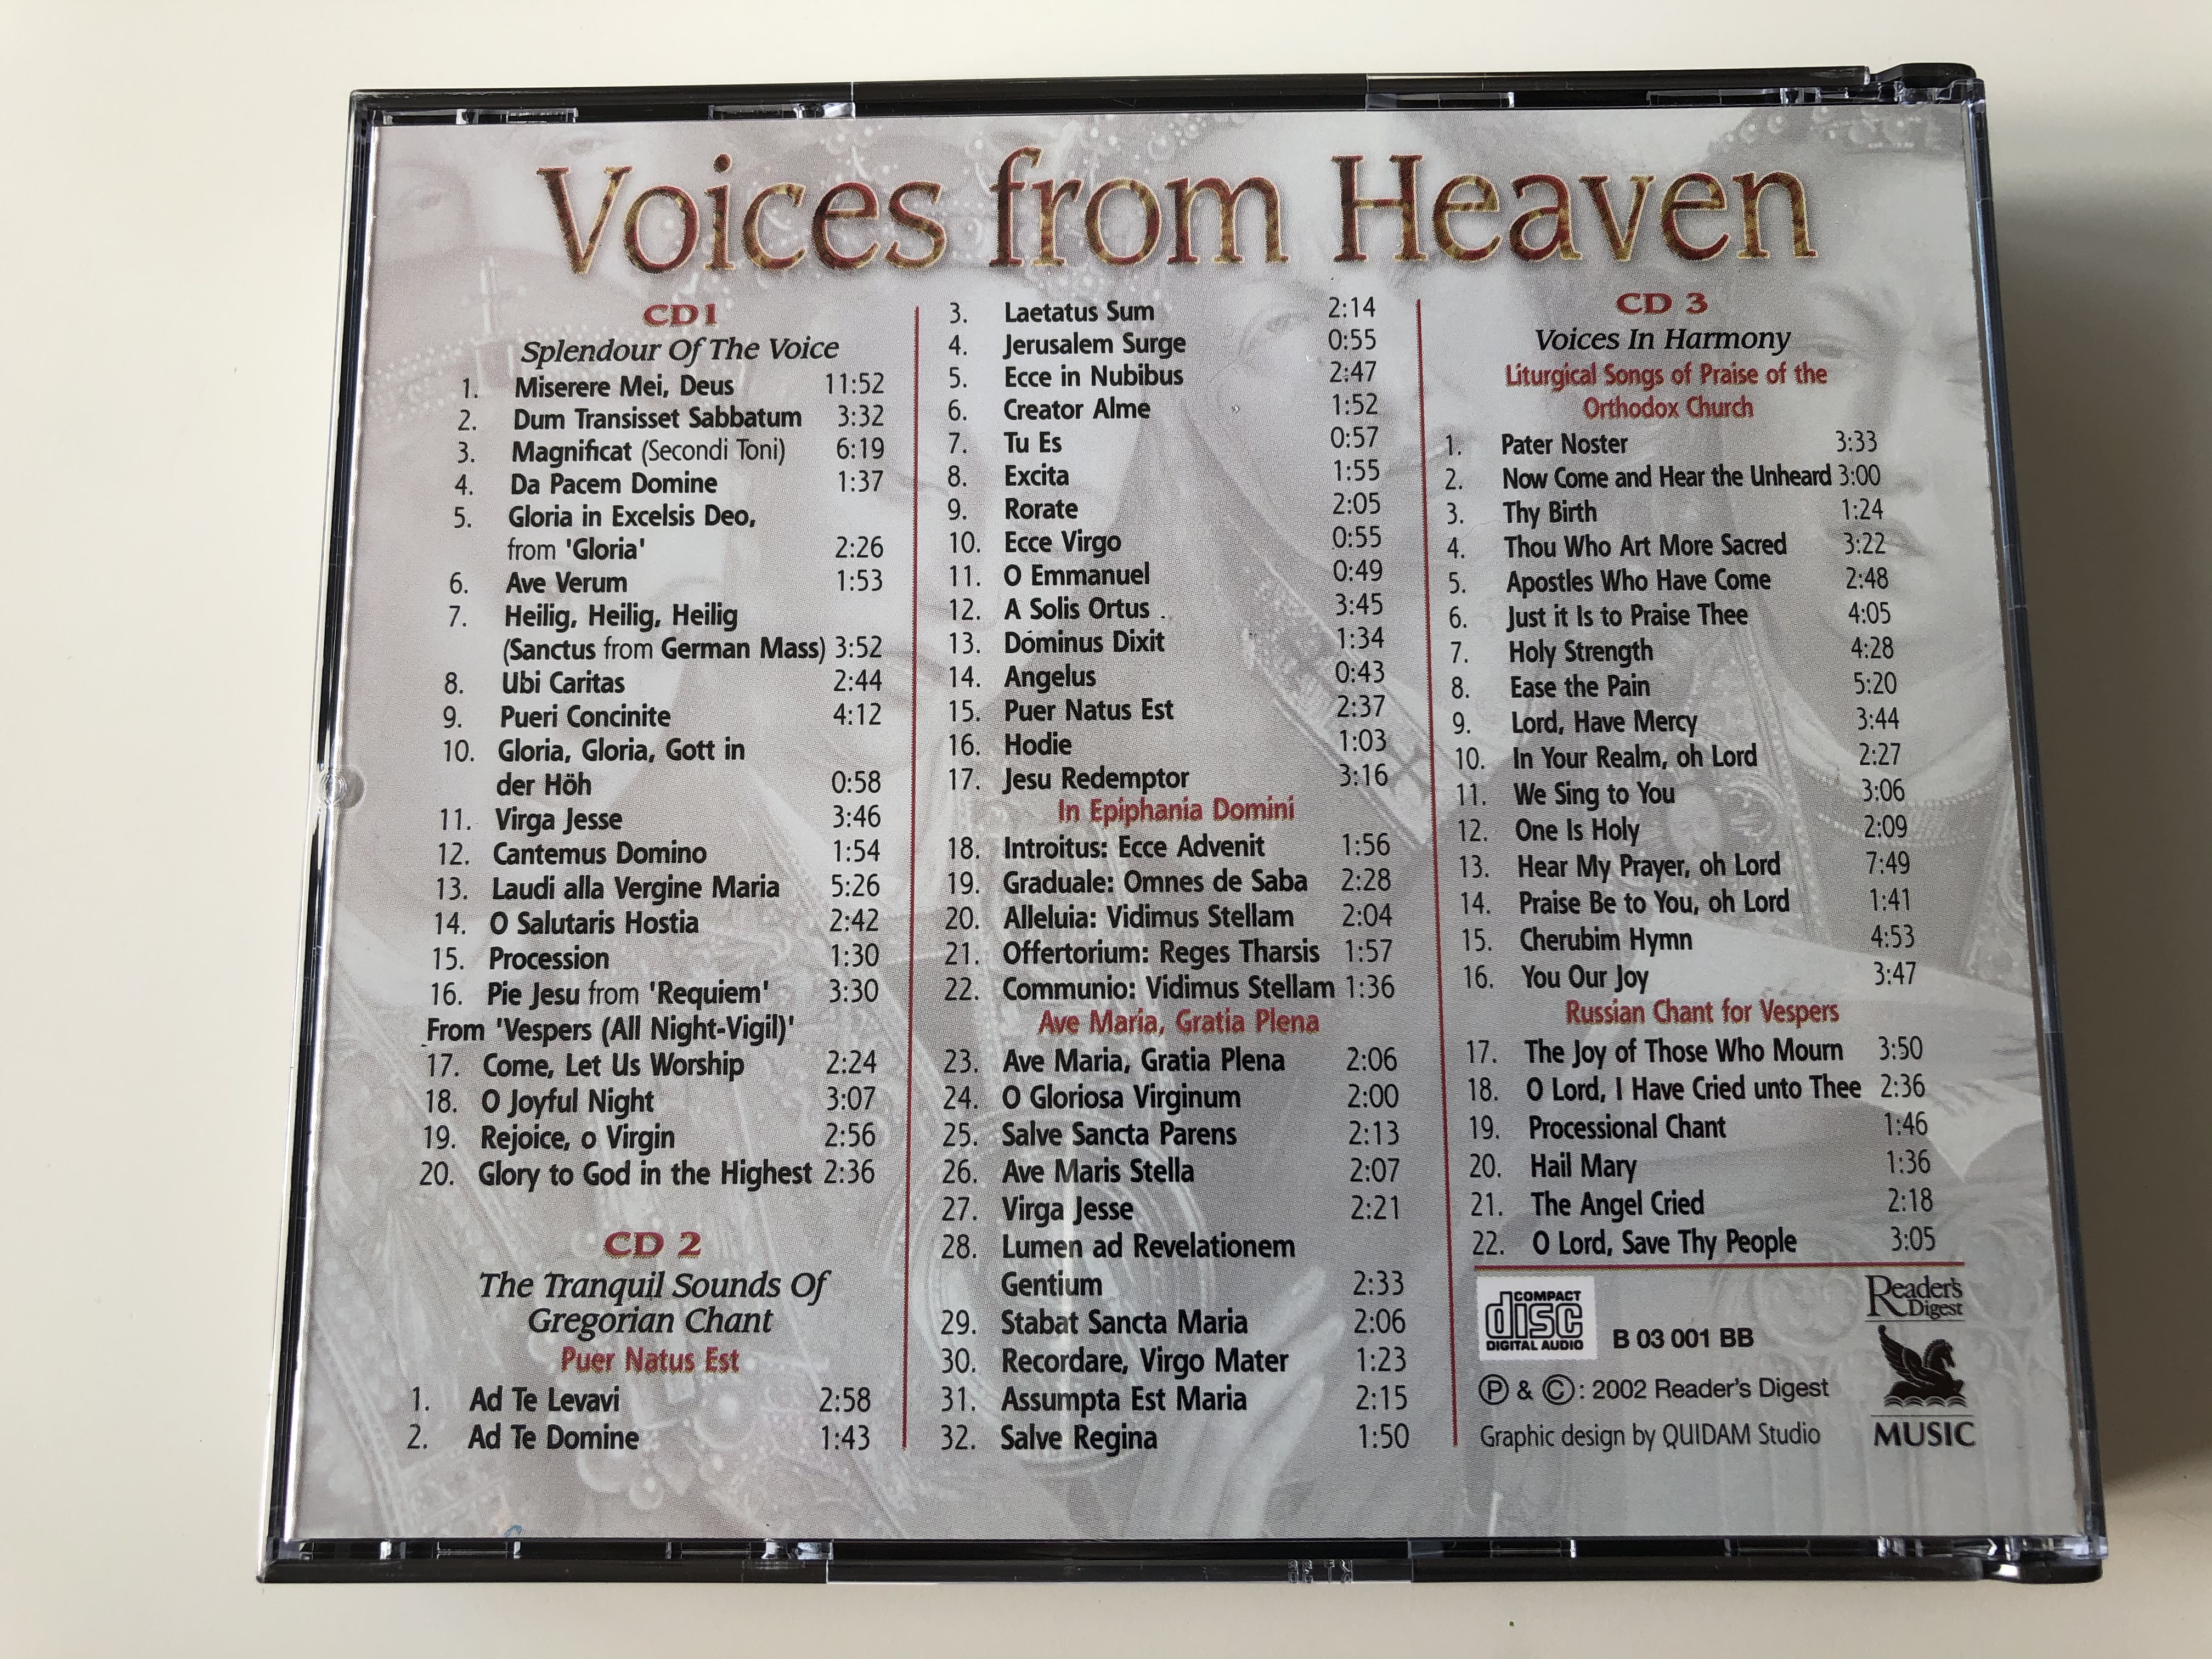 voices-from-heaven-reader-s-digest-3x-audio-cd-2002-b-03-001-bb-11-.jpg